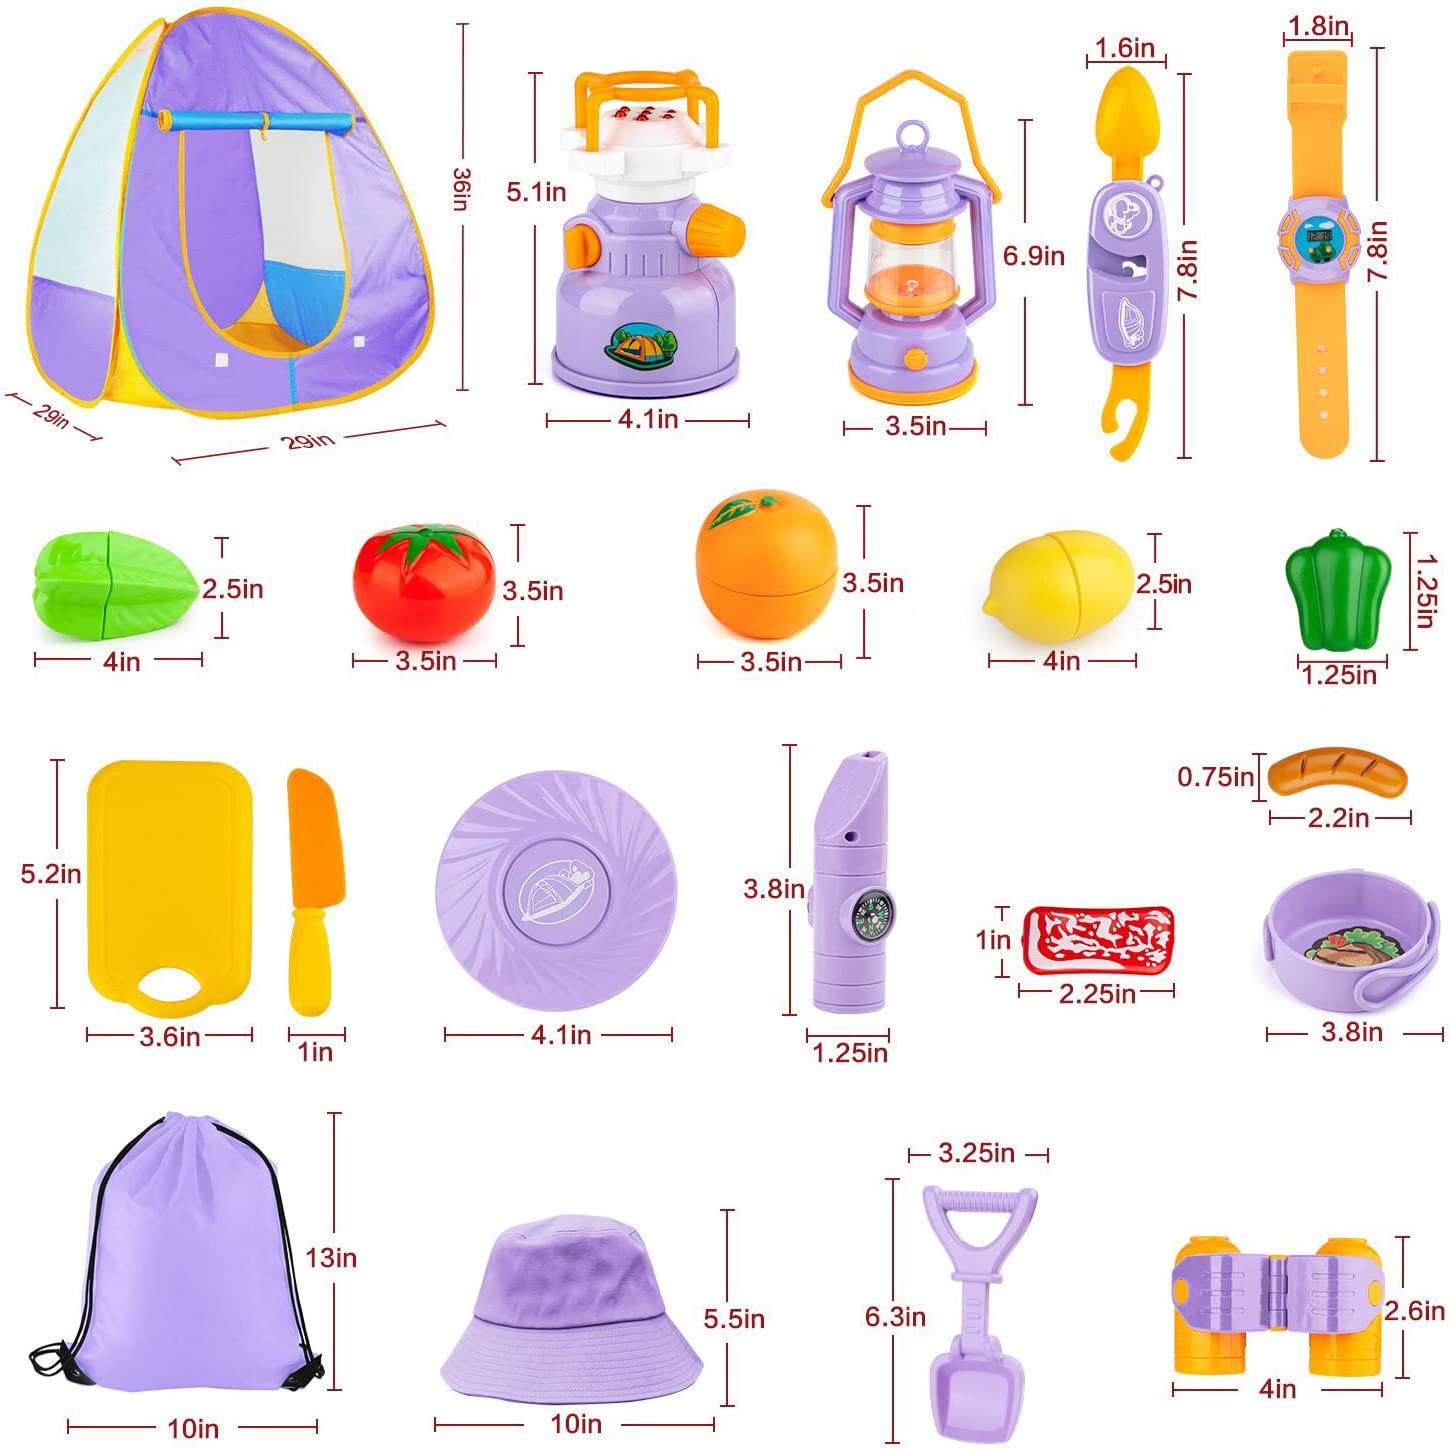 MIBOTE, MIBOTE 45pcs Pop Up Play Tent with Camping Gear Tools Indoor Outdoor Pretend Play Set Toy for Boys/Girls - Including Telescope, Walkie Talkie, Camping Tent, and etc